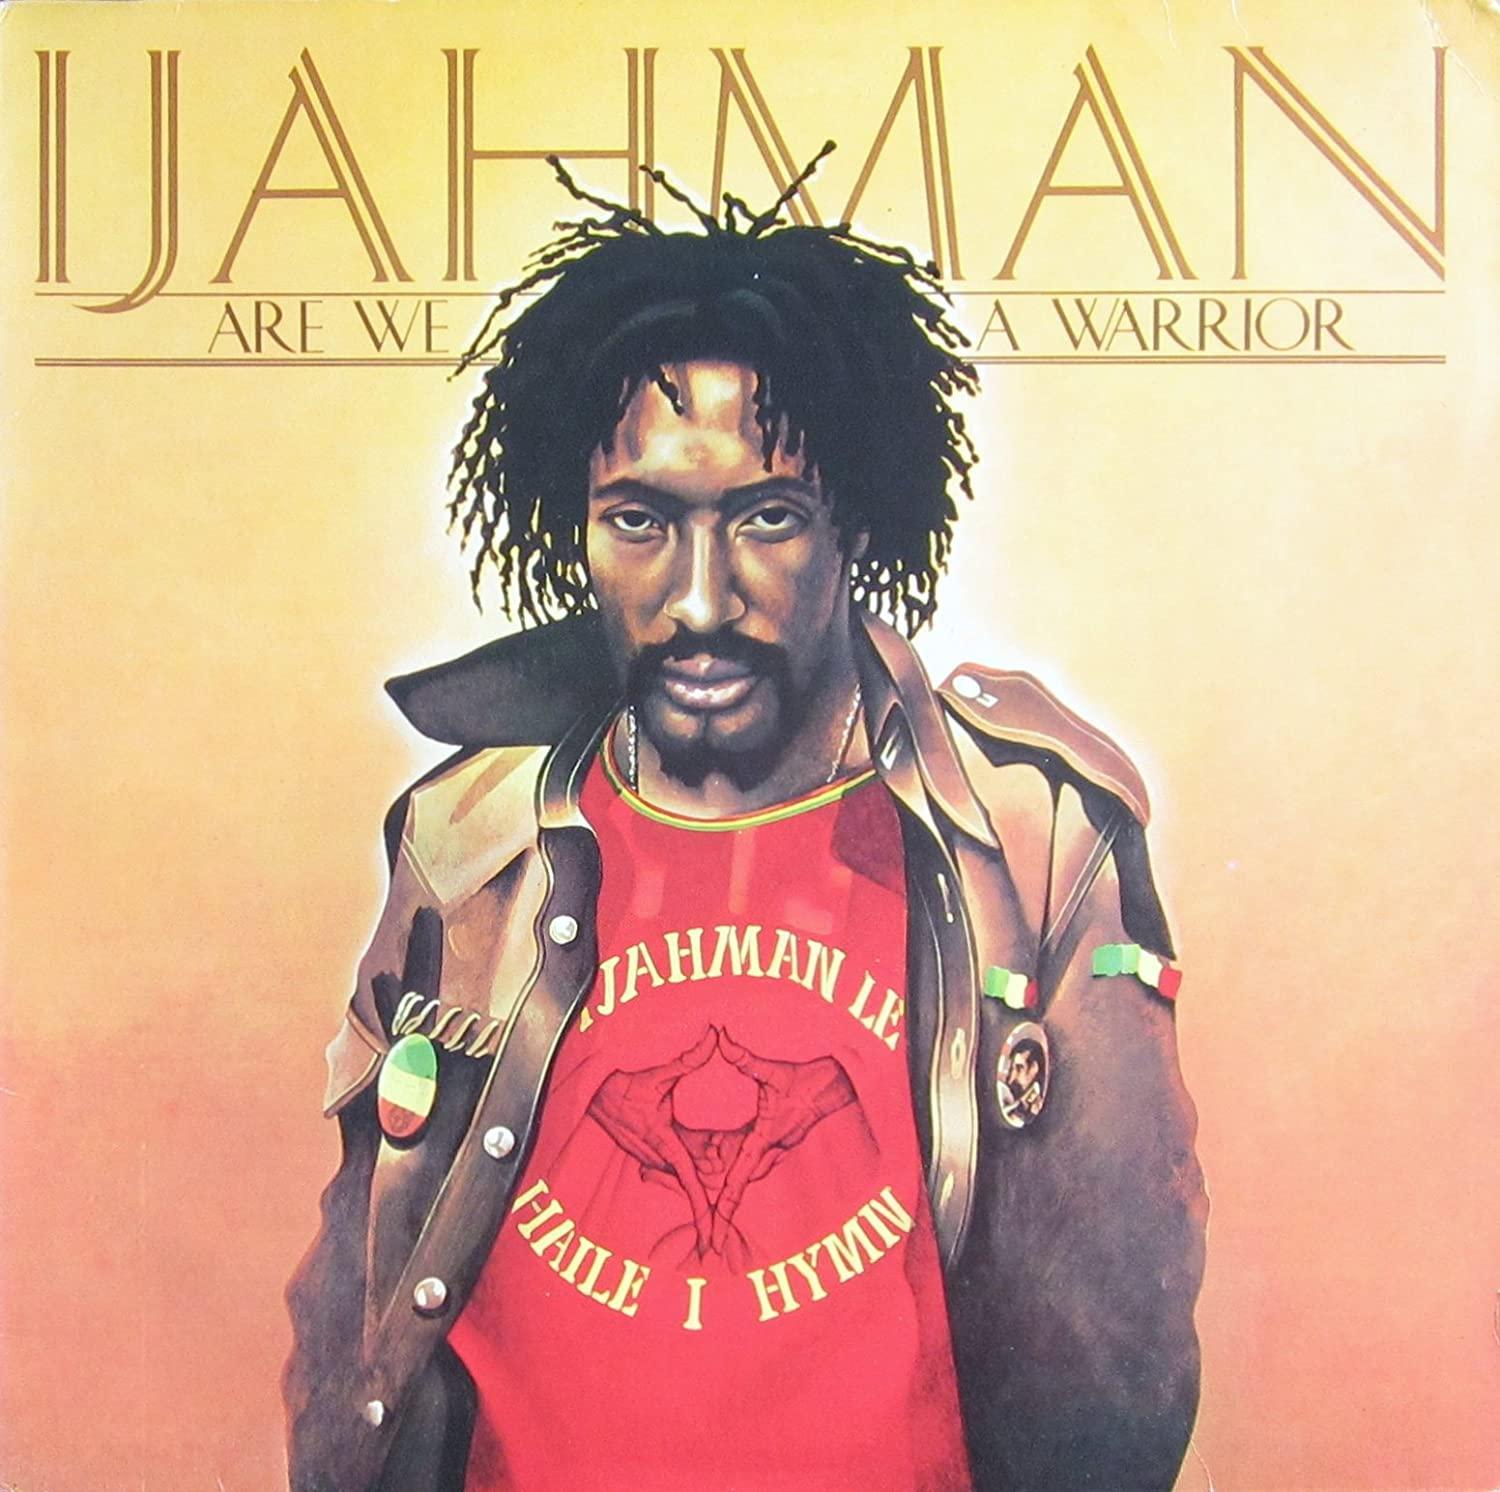 Selected image for IJAHMAN - Are We A Warrior